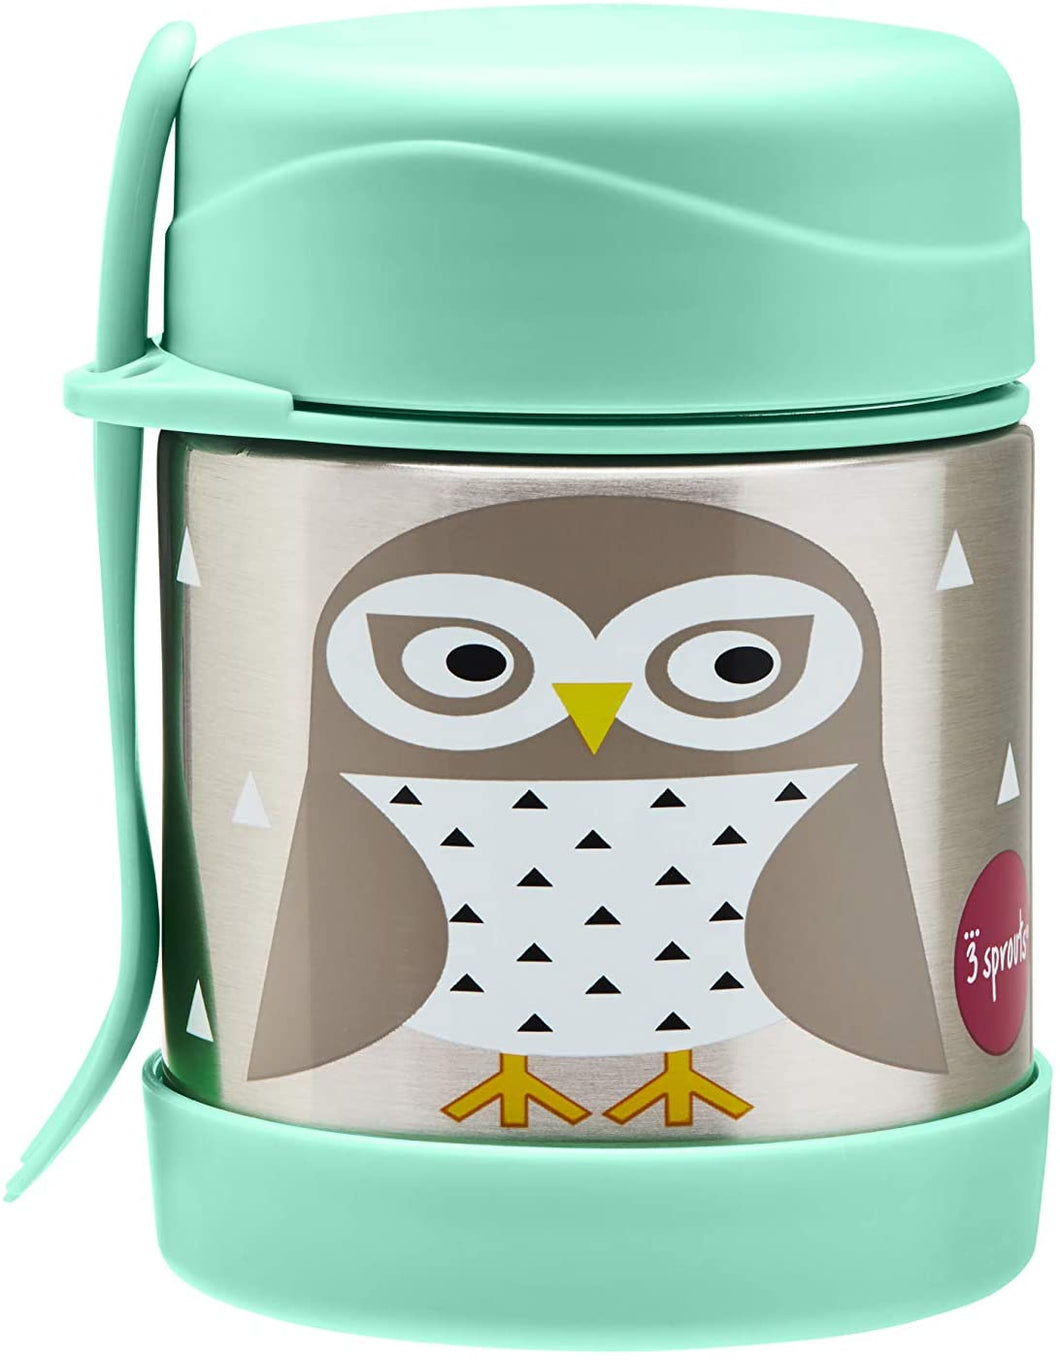 Stainless Steel Food Jar - 3 Sprouts Owl